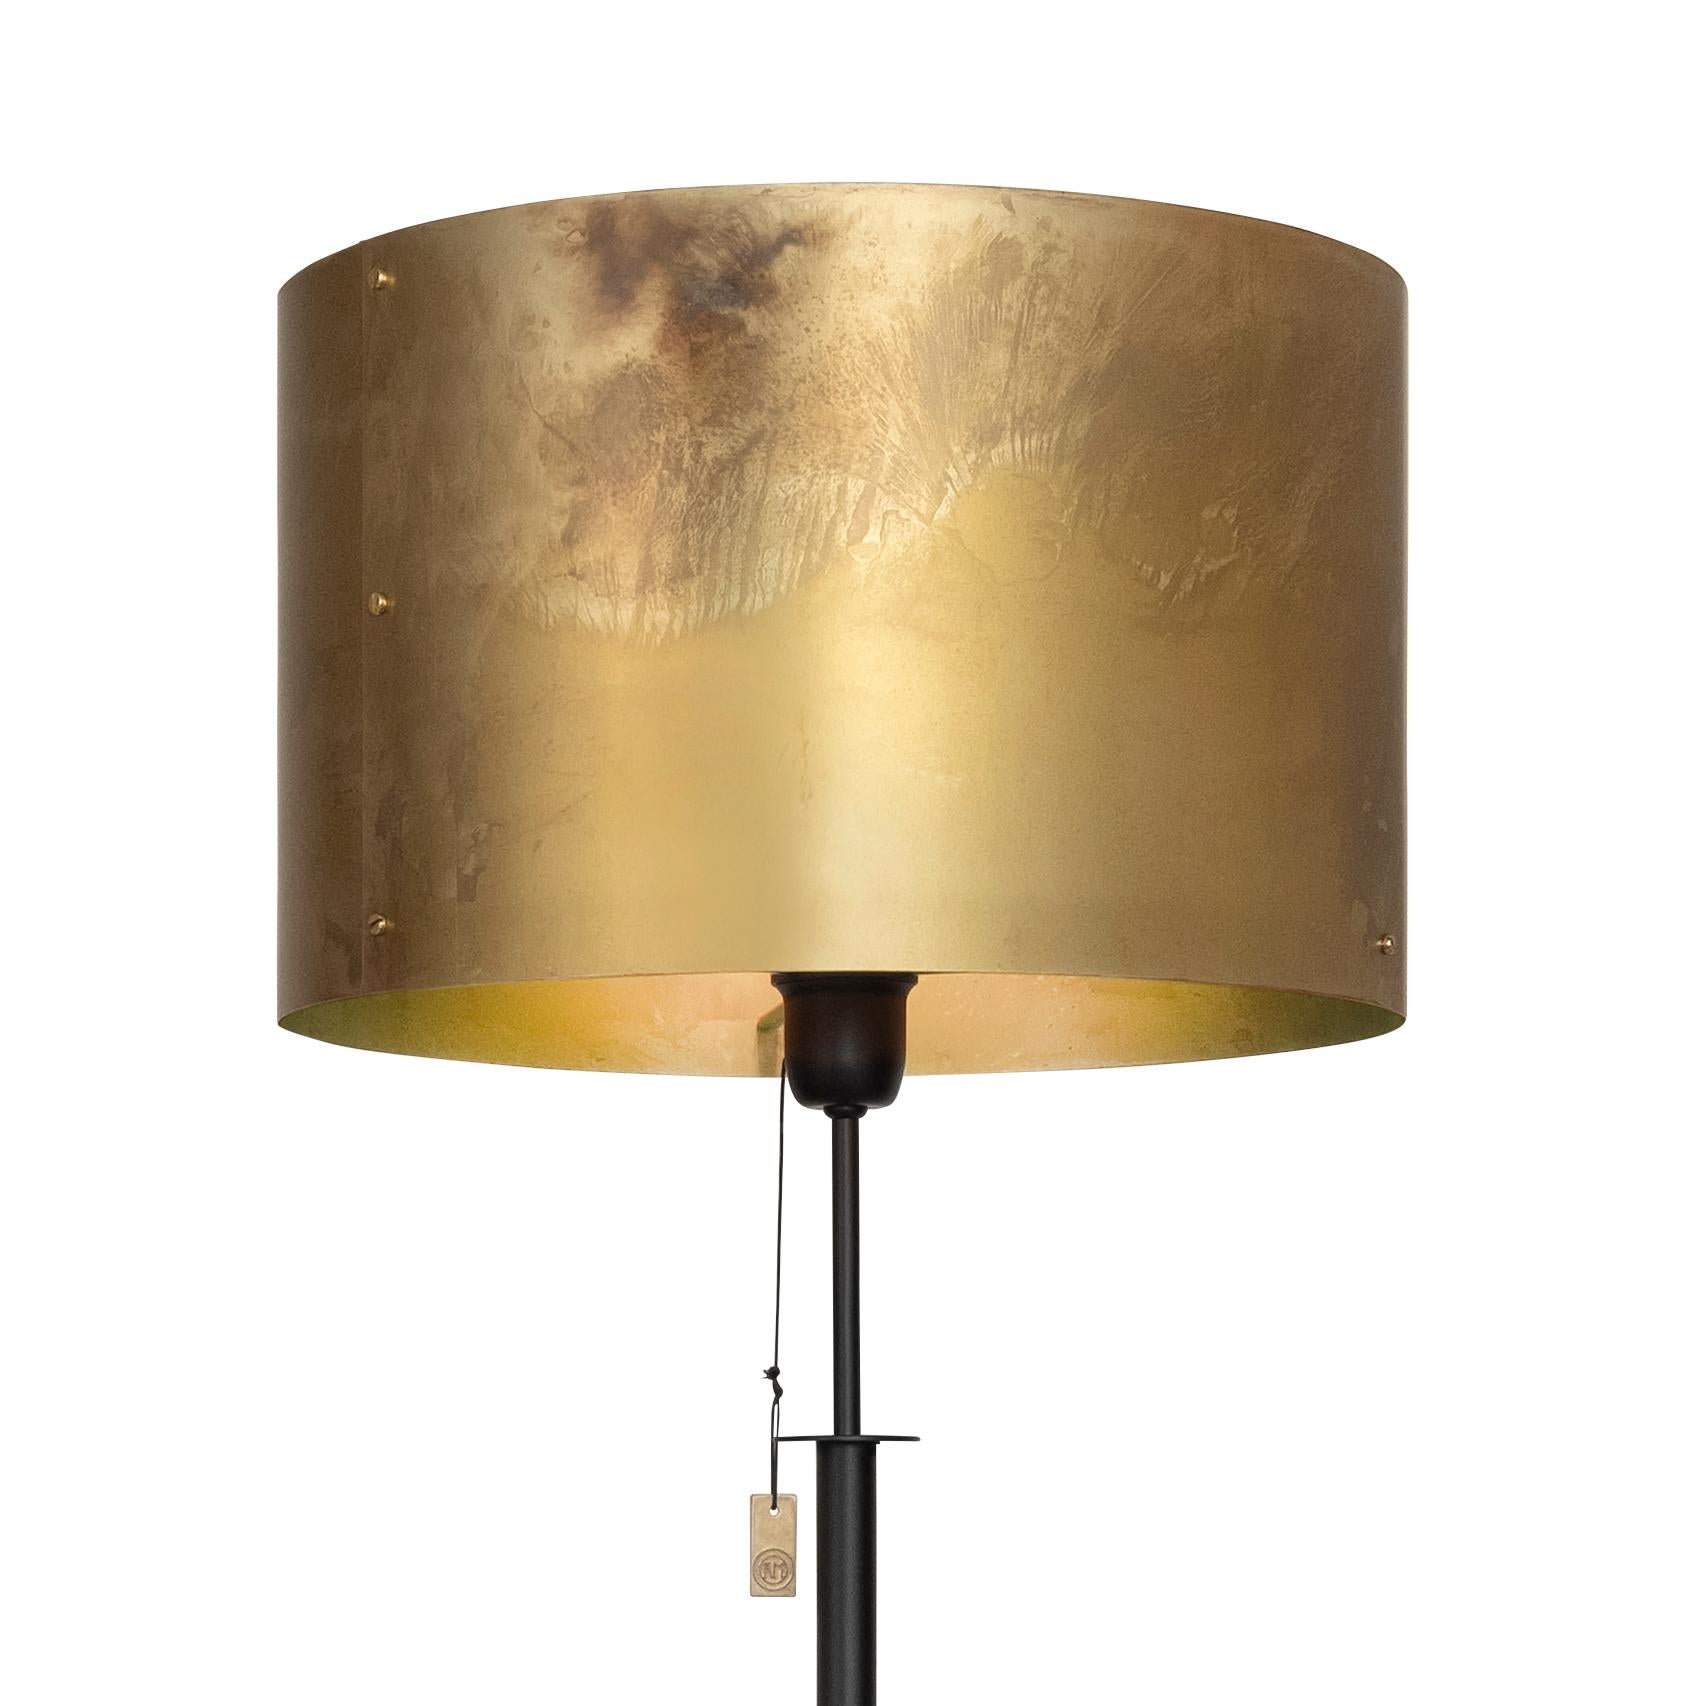 Lamp model Svep floor lamp designed by Konsthantverk and manufactured by themselves.

The production of lamps, wall lights and floor lamps are manufactured using craftsman’s techniques with the same materials and techniques as the first